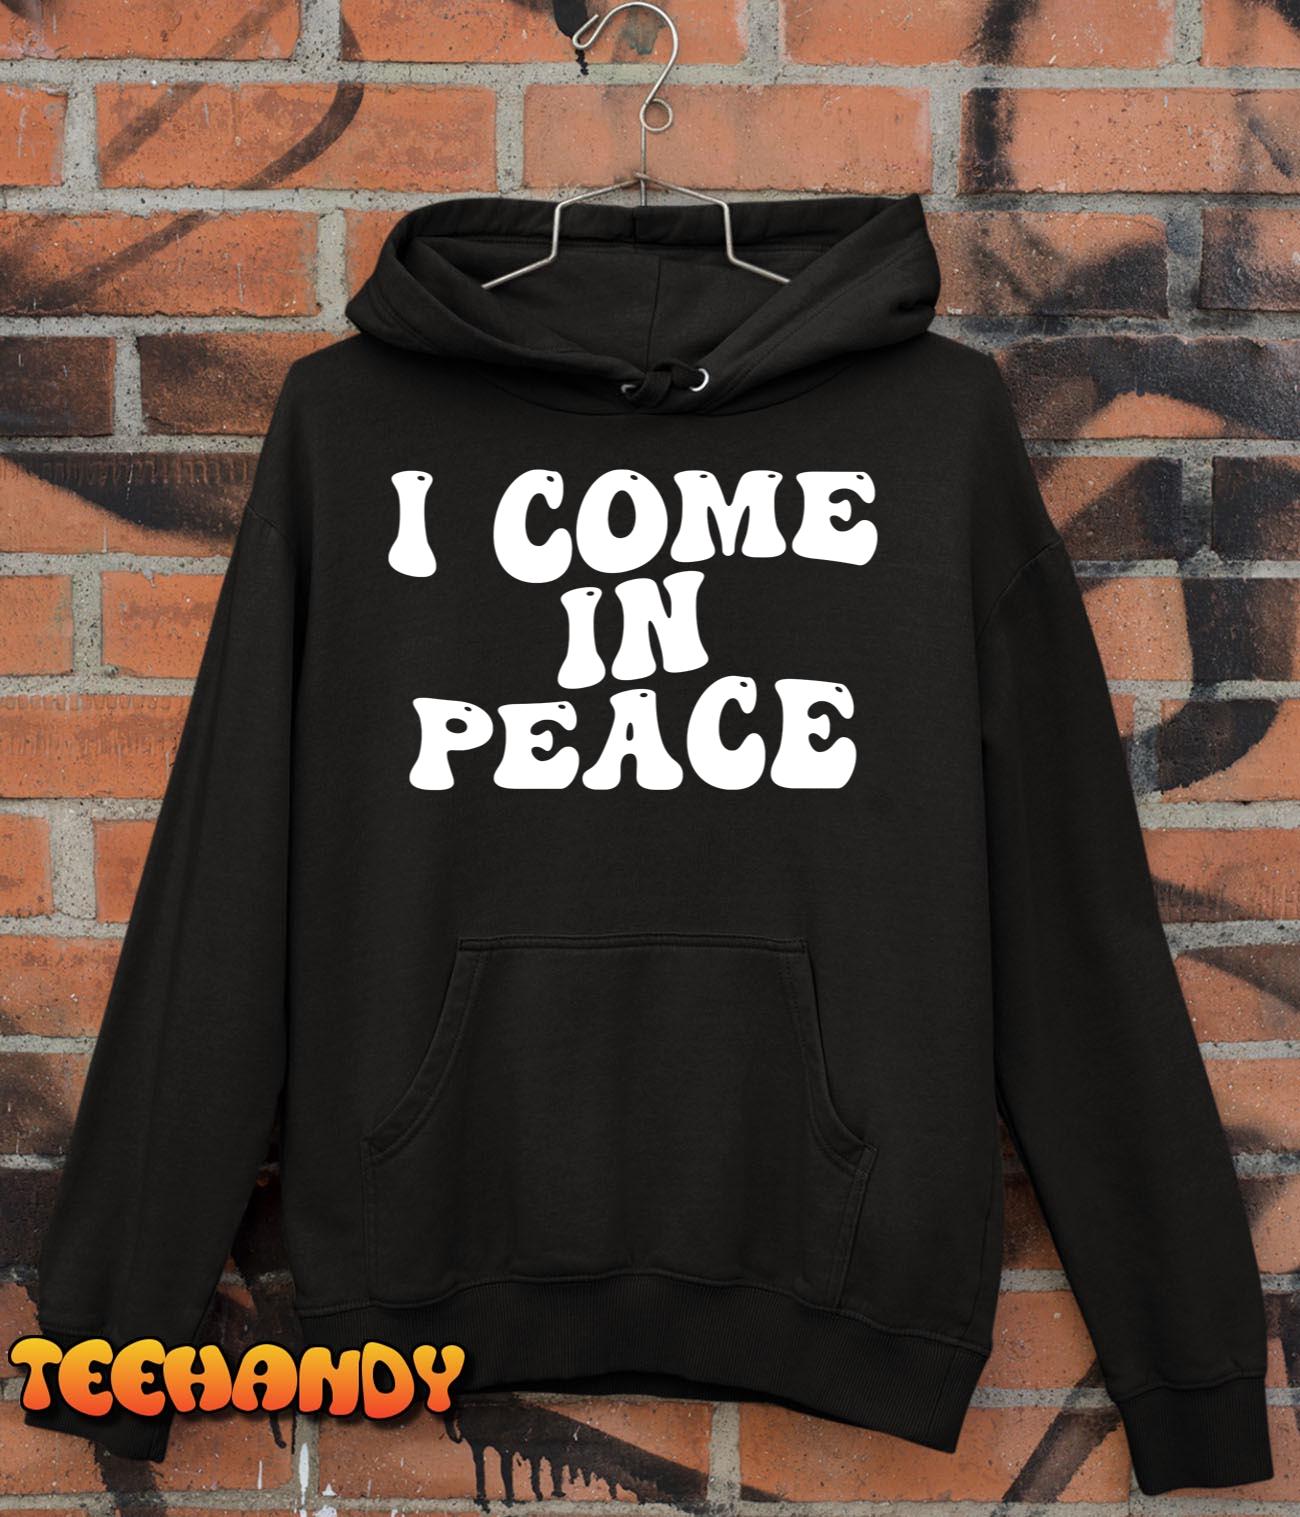 I COME IN PEACE – I’M PEACE Funny Couple’s Matching T-Shirt